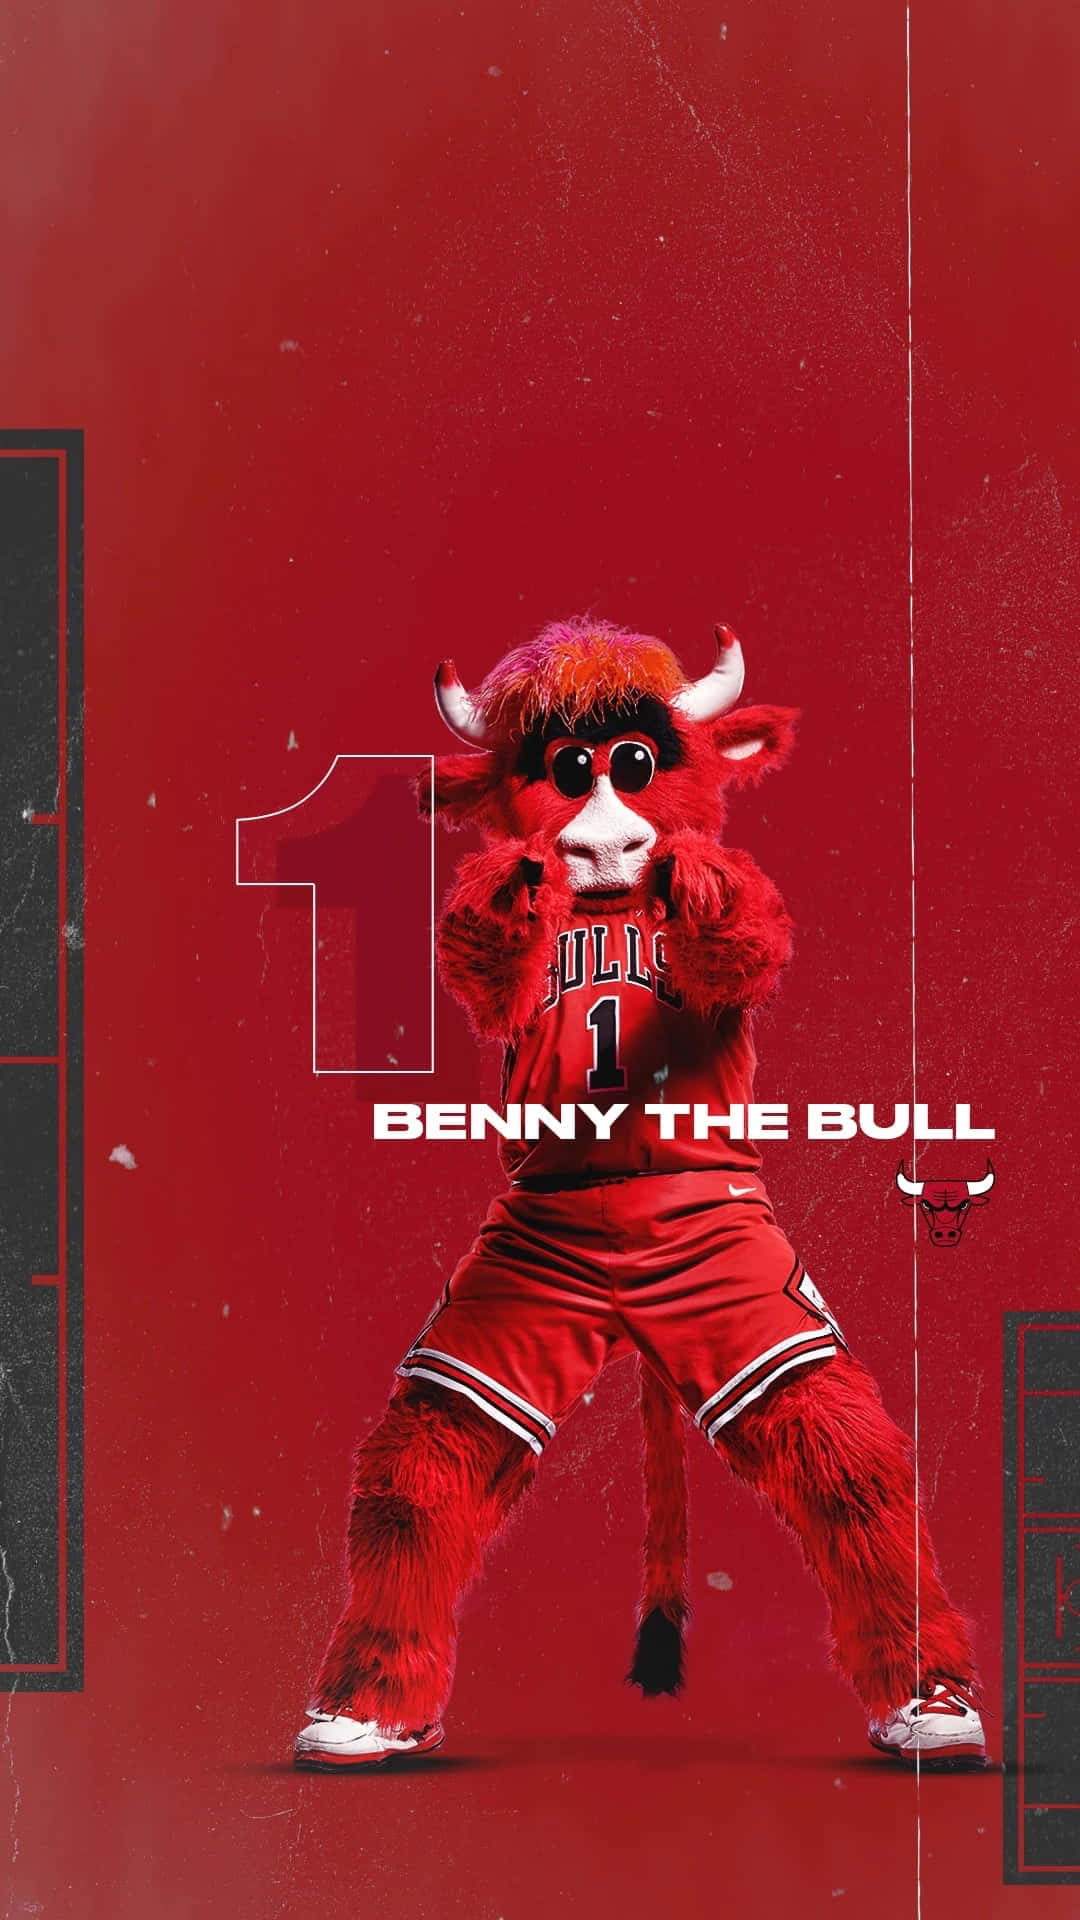 Show Your Team Spirit With A Chicago Bulls Iphone Wallpaper! Background